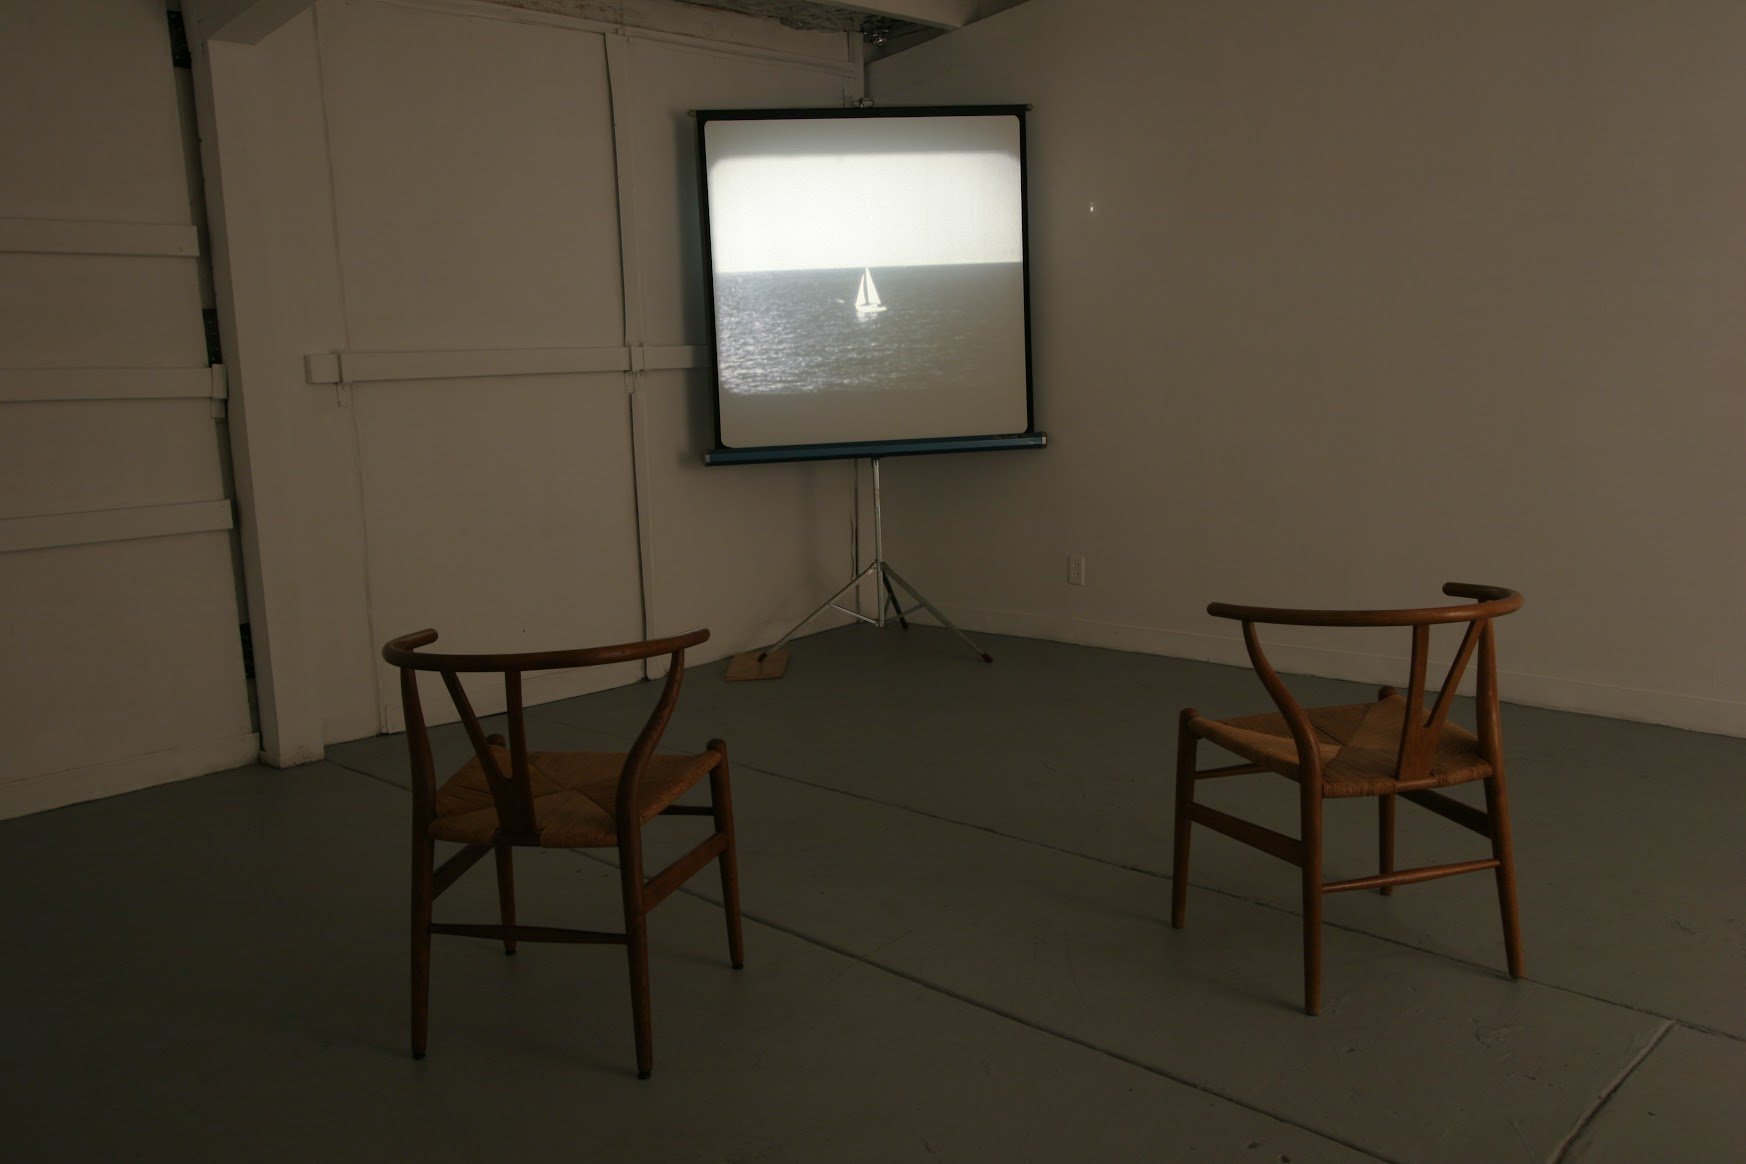  Marcel Broodthaers,  Un Voyage en Mer du Nord  (A Voyage on the North Sea), 1973—1974.   Installation of projected audio-visual recording [16 mm film, colour, silent, 4 min 15s], accompanied by artist's book [offset lithograph printed on double leav